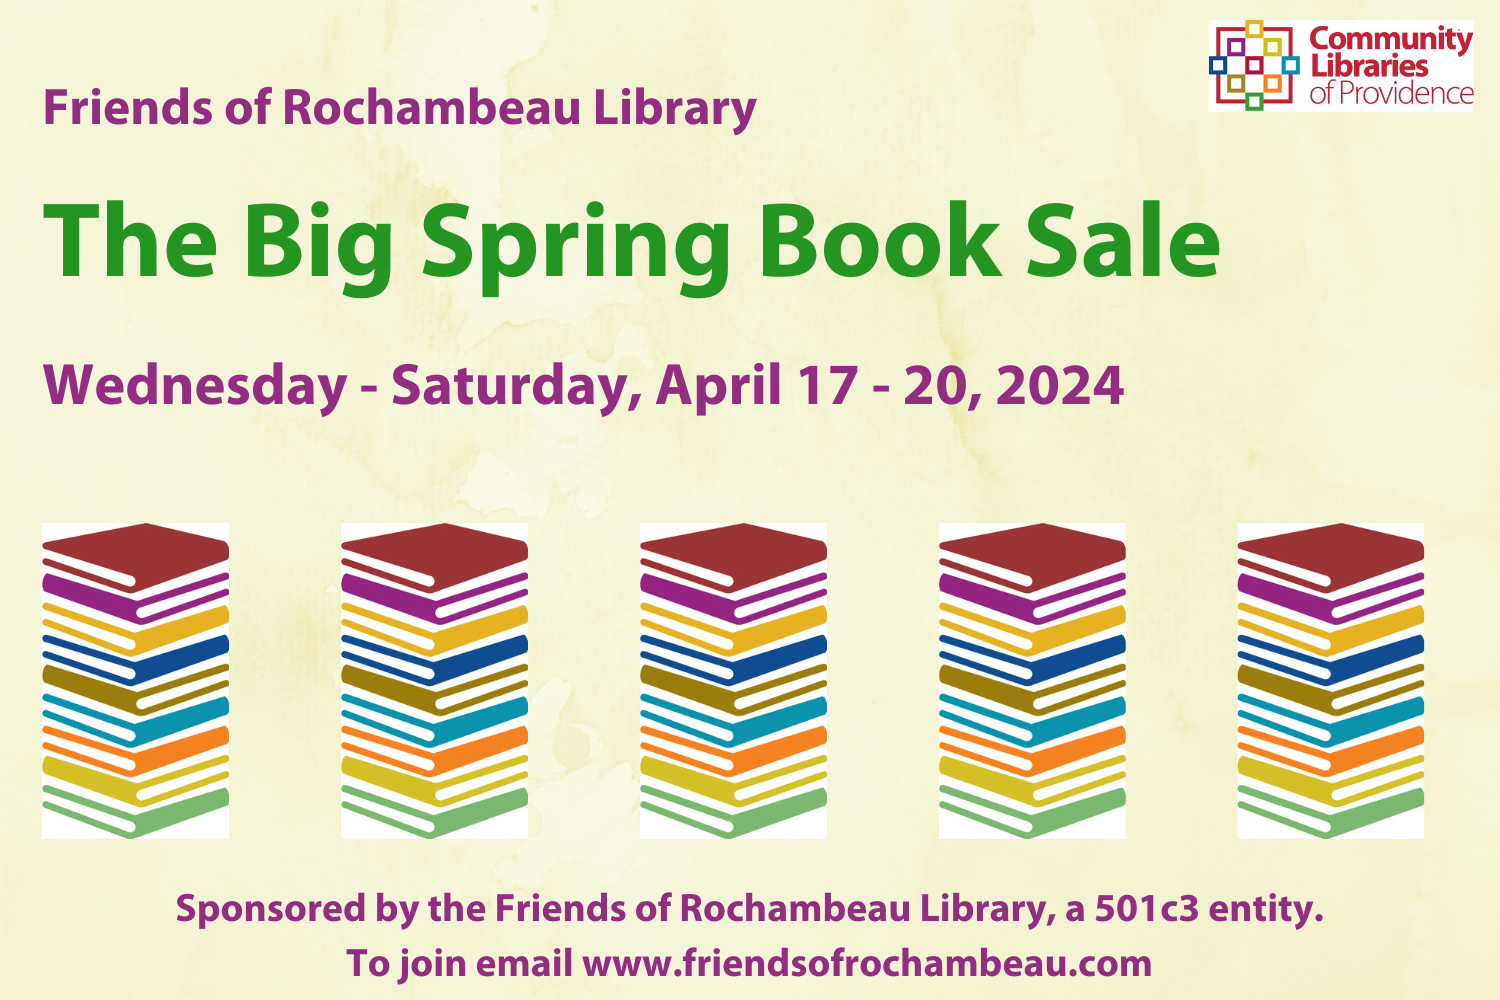 The Big Spring Book Sale